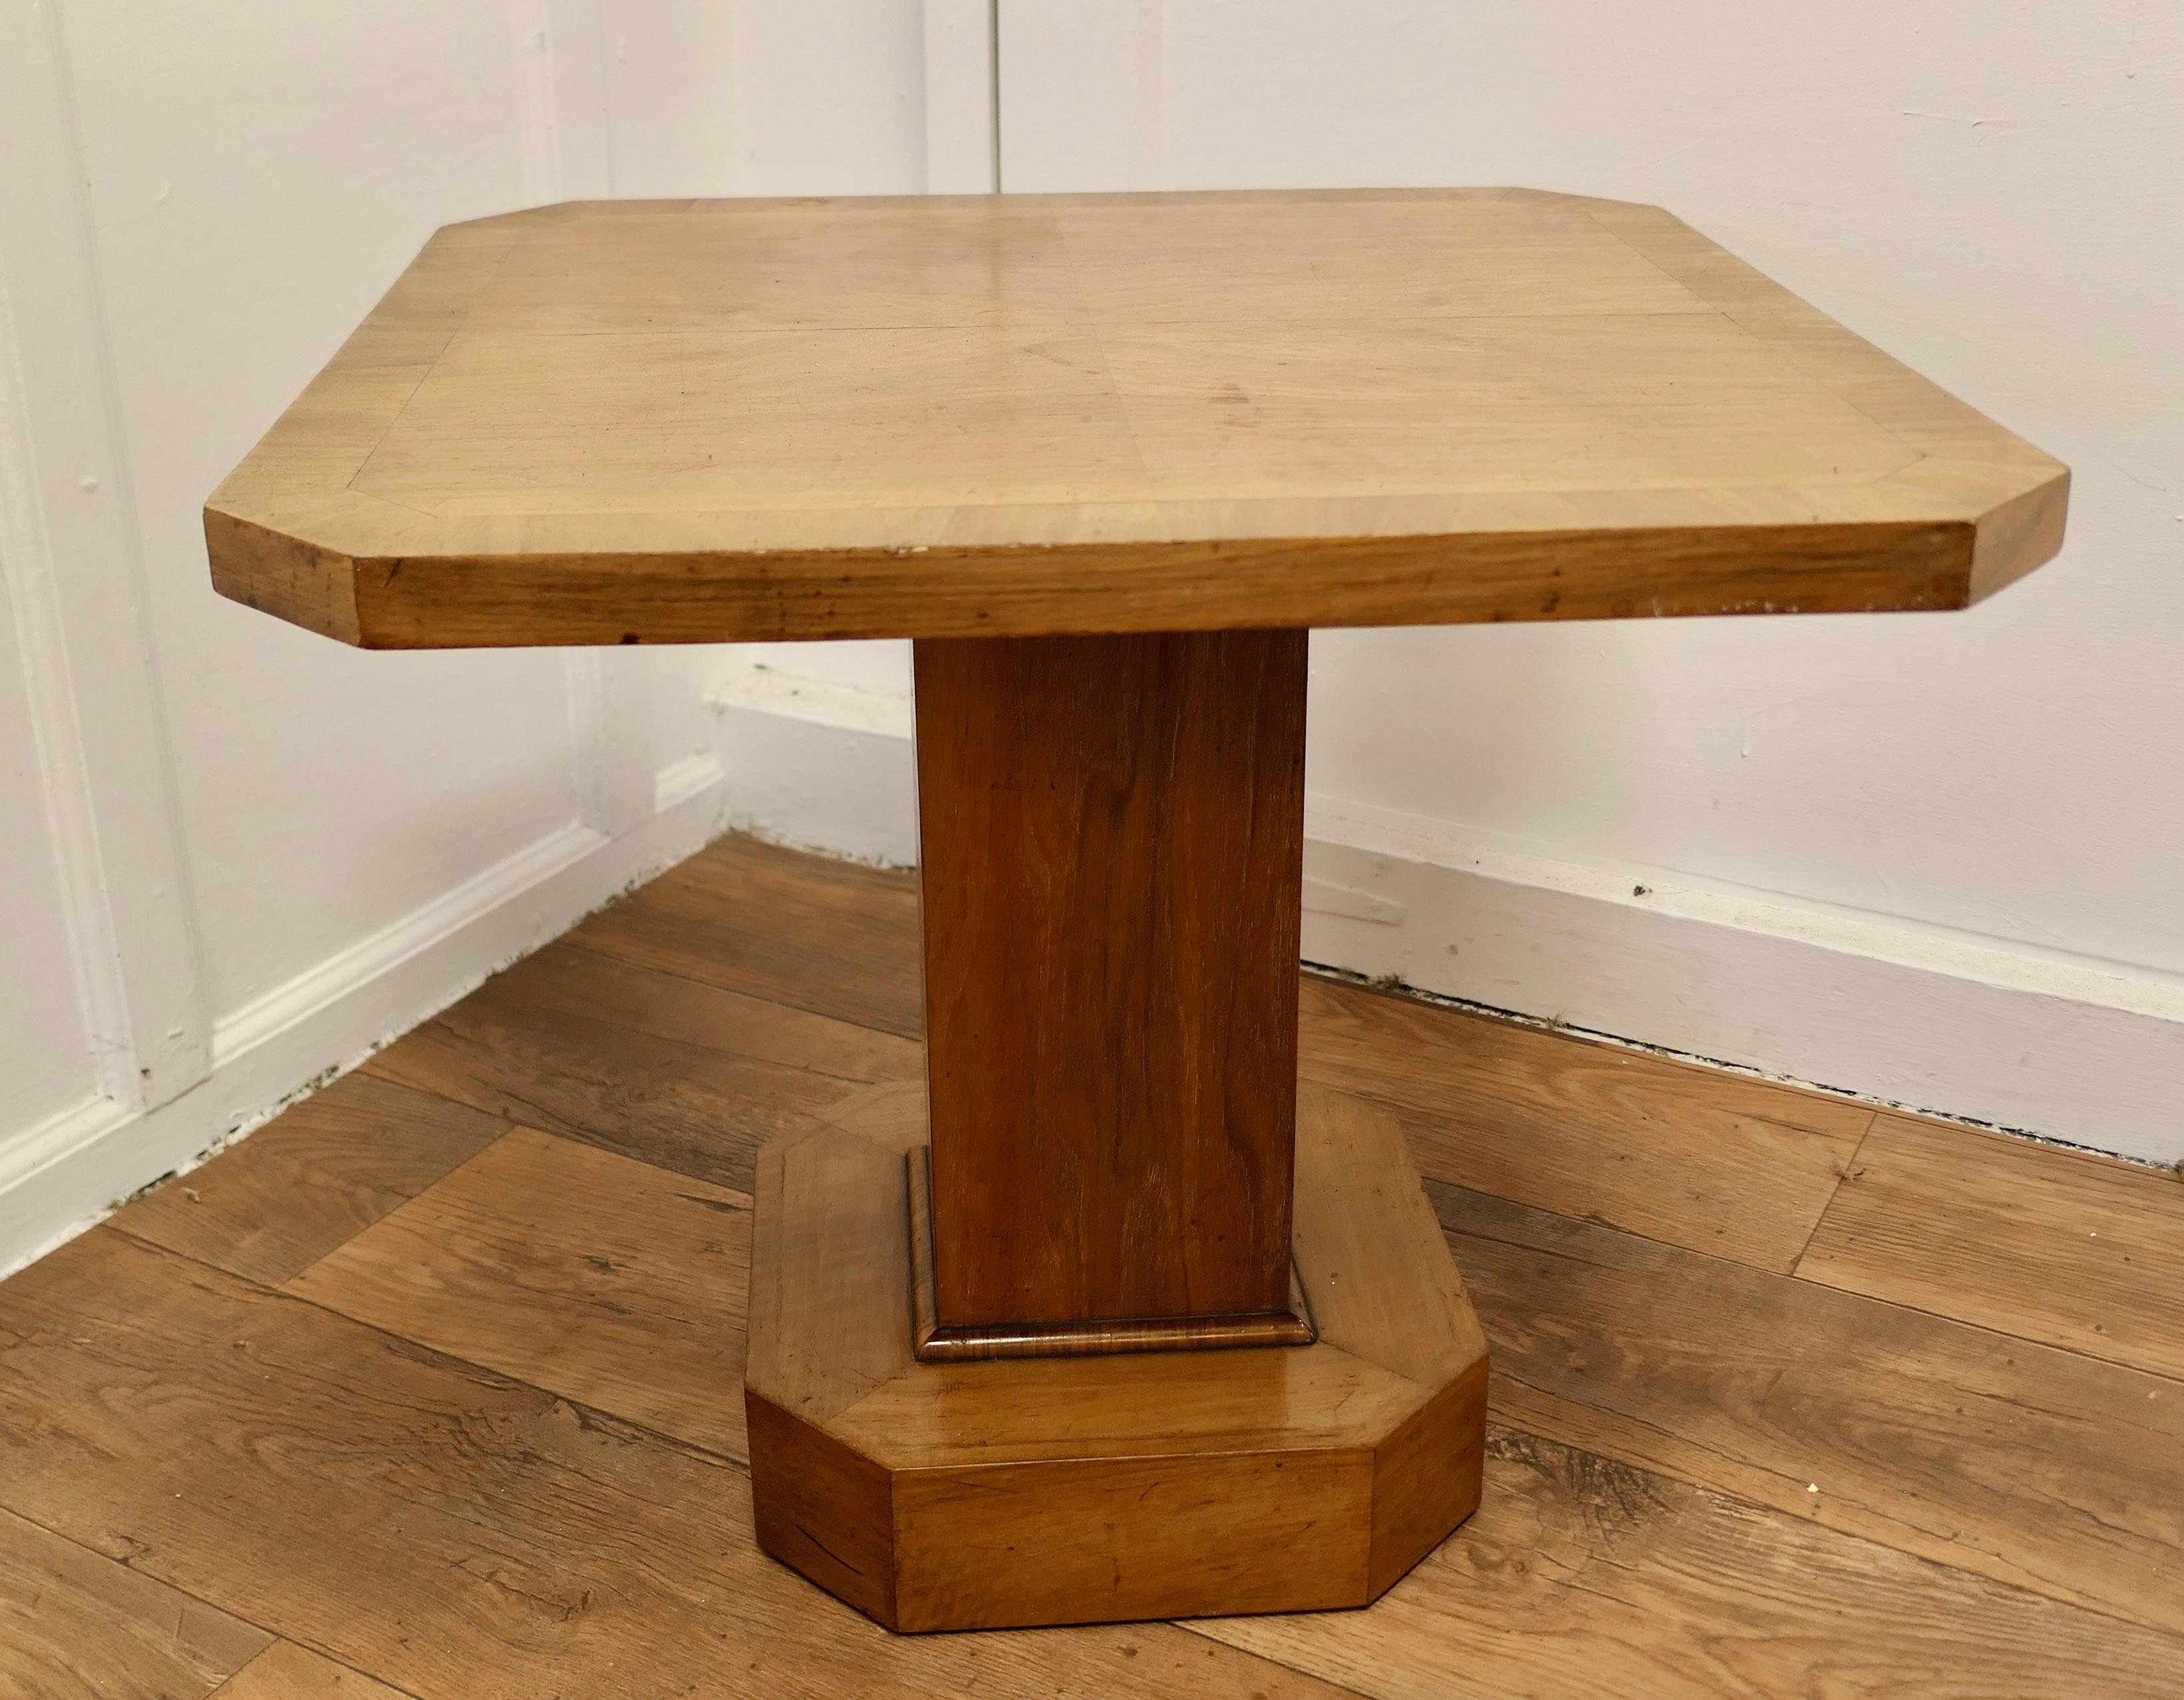 Odeon Style Art Deco Maple Coffee Table

A very stylish piece of Art Deco Design, this 8 sided walnut coffee table is set on an 8 sided plinth and supported on a 4 sided column base
The table is in very good sound used condition 
The Table is